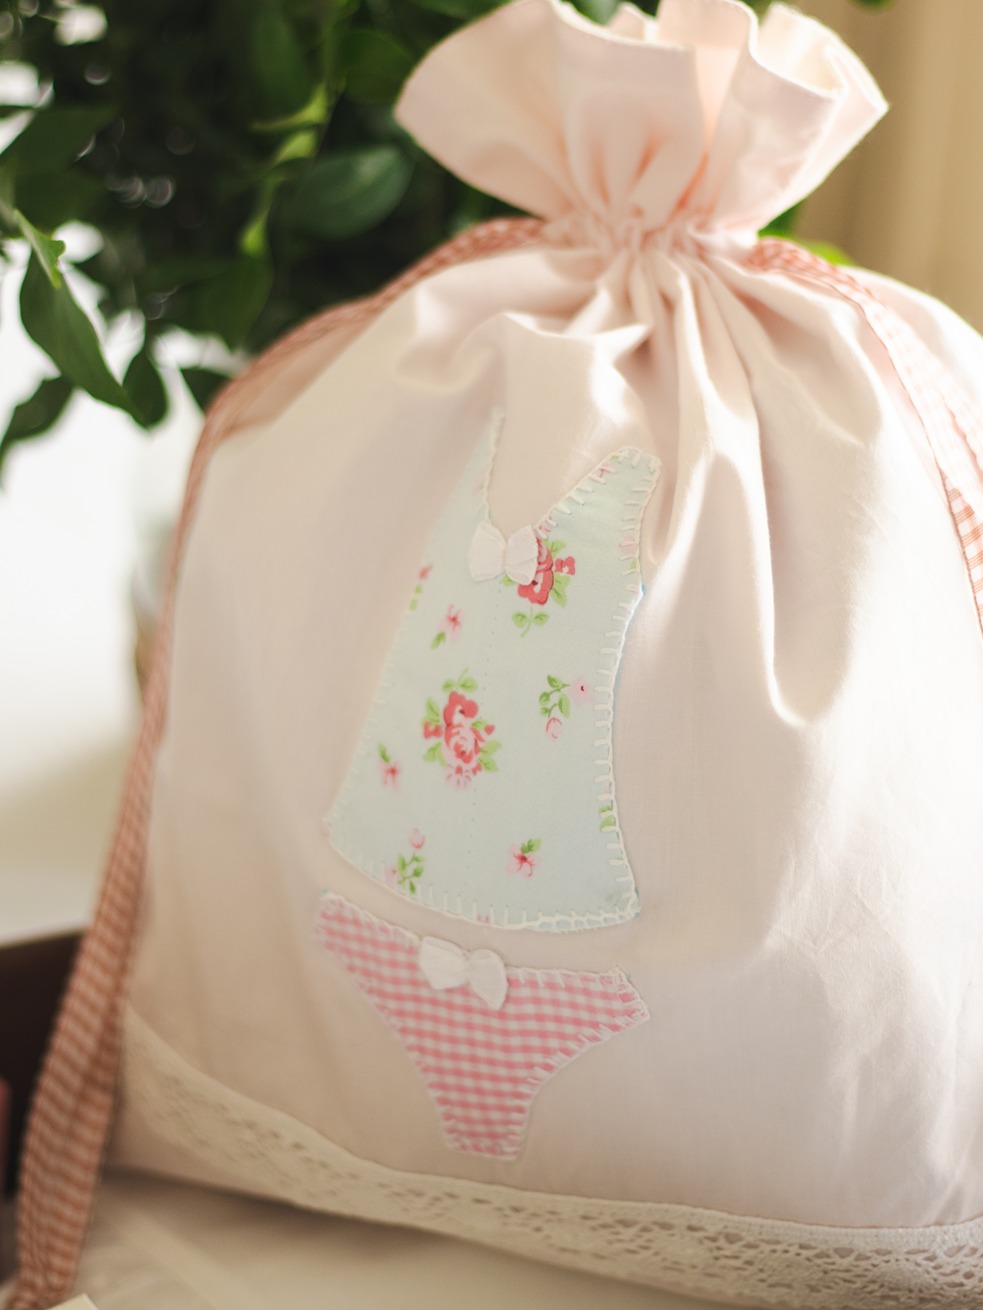 Drawstring Bag - Light pink with slip and underwear applique detailing (Size: 12